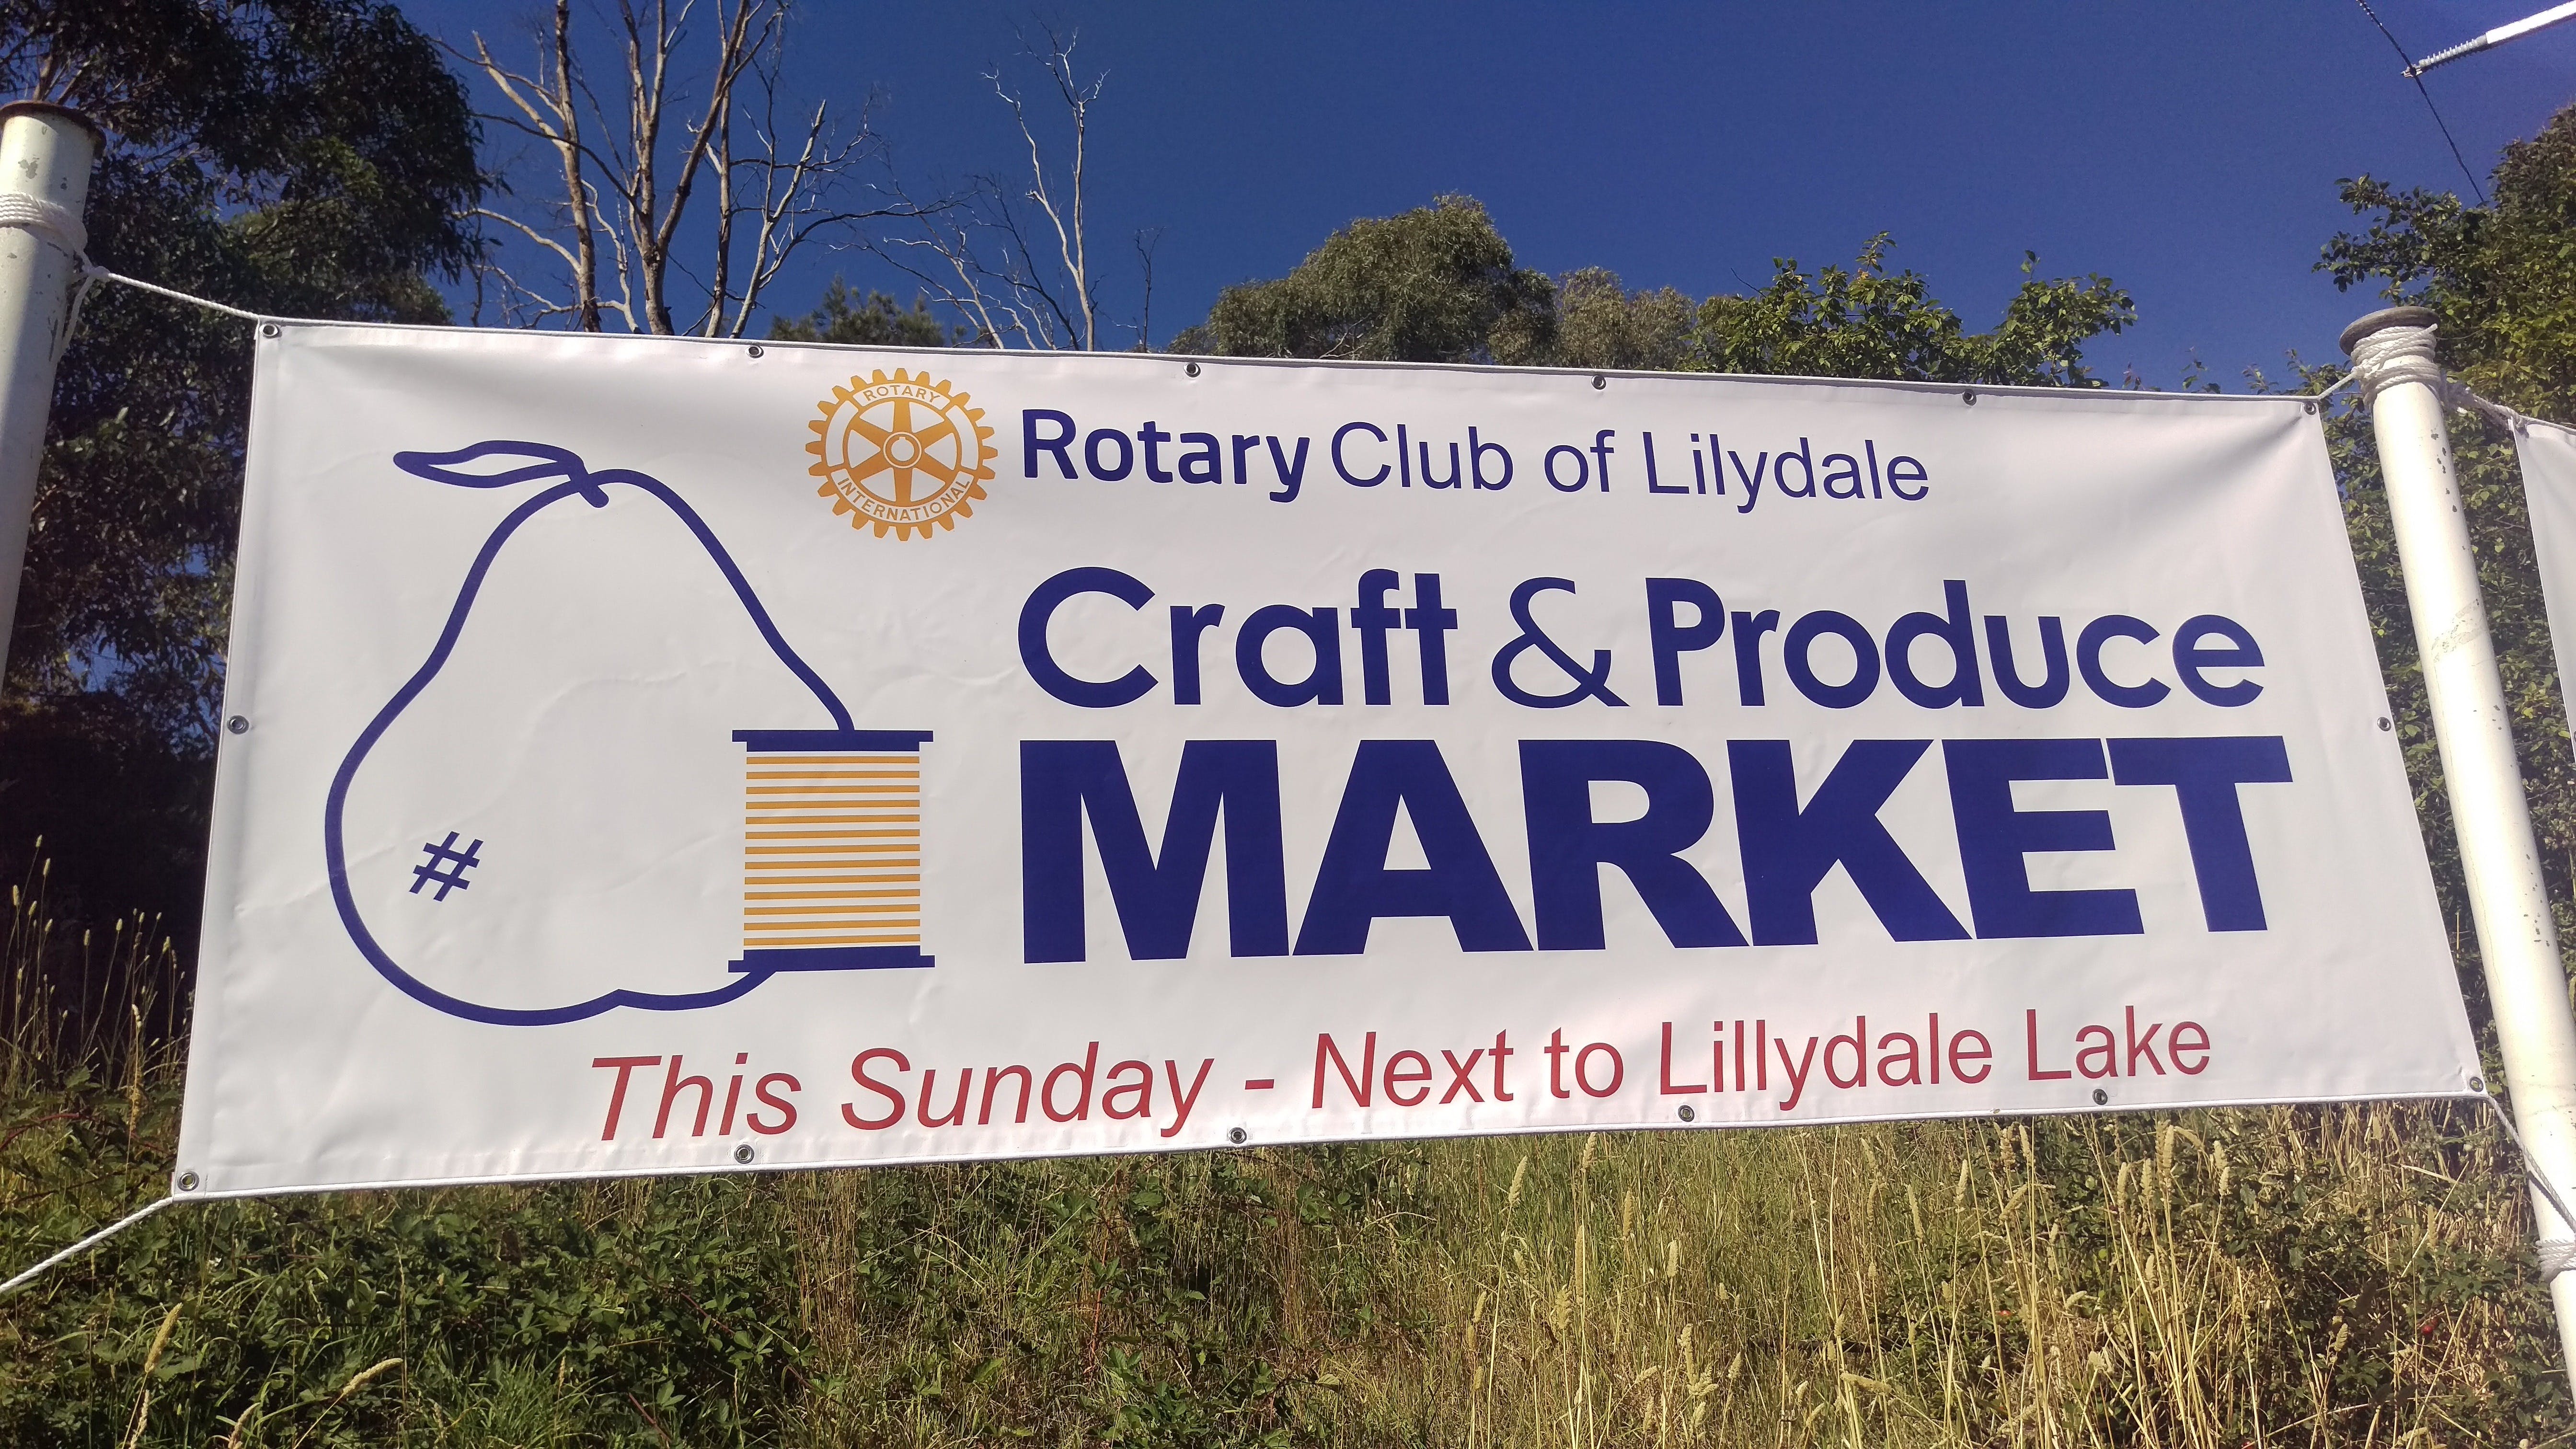 Rotary Club of Lilydale Craft and Produce Market - Pubs Sydney